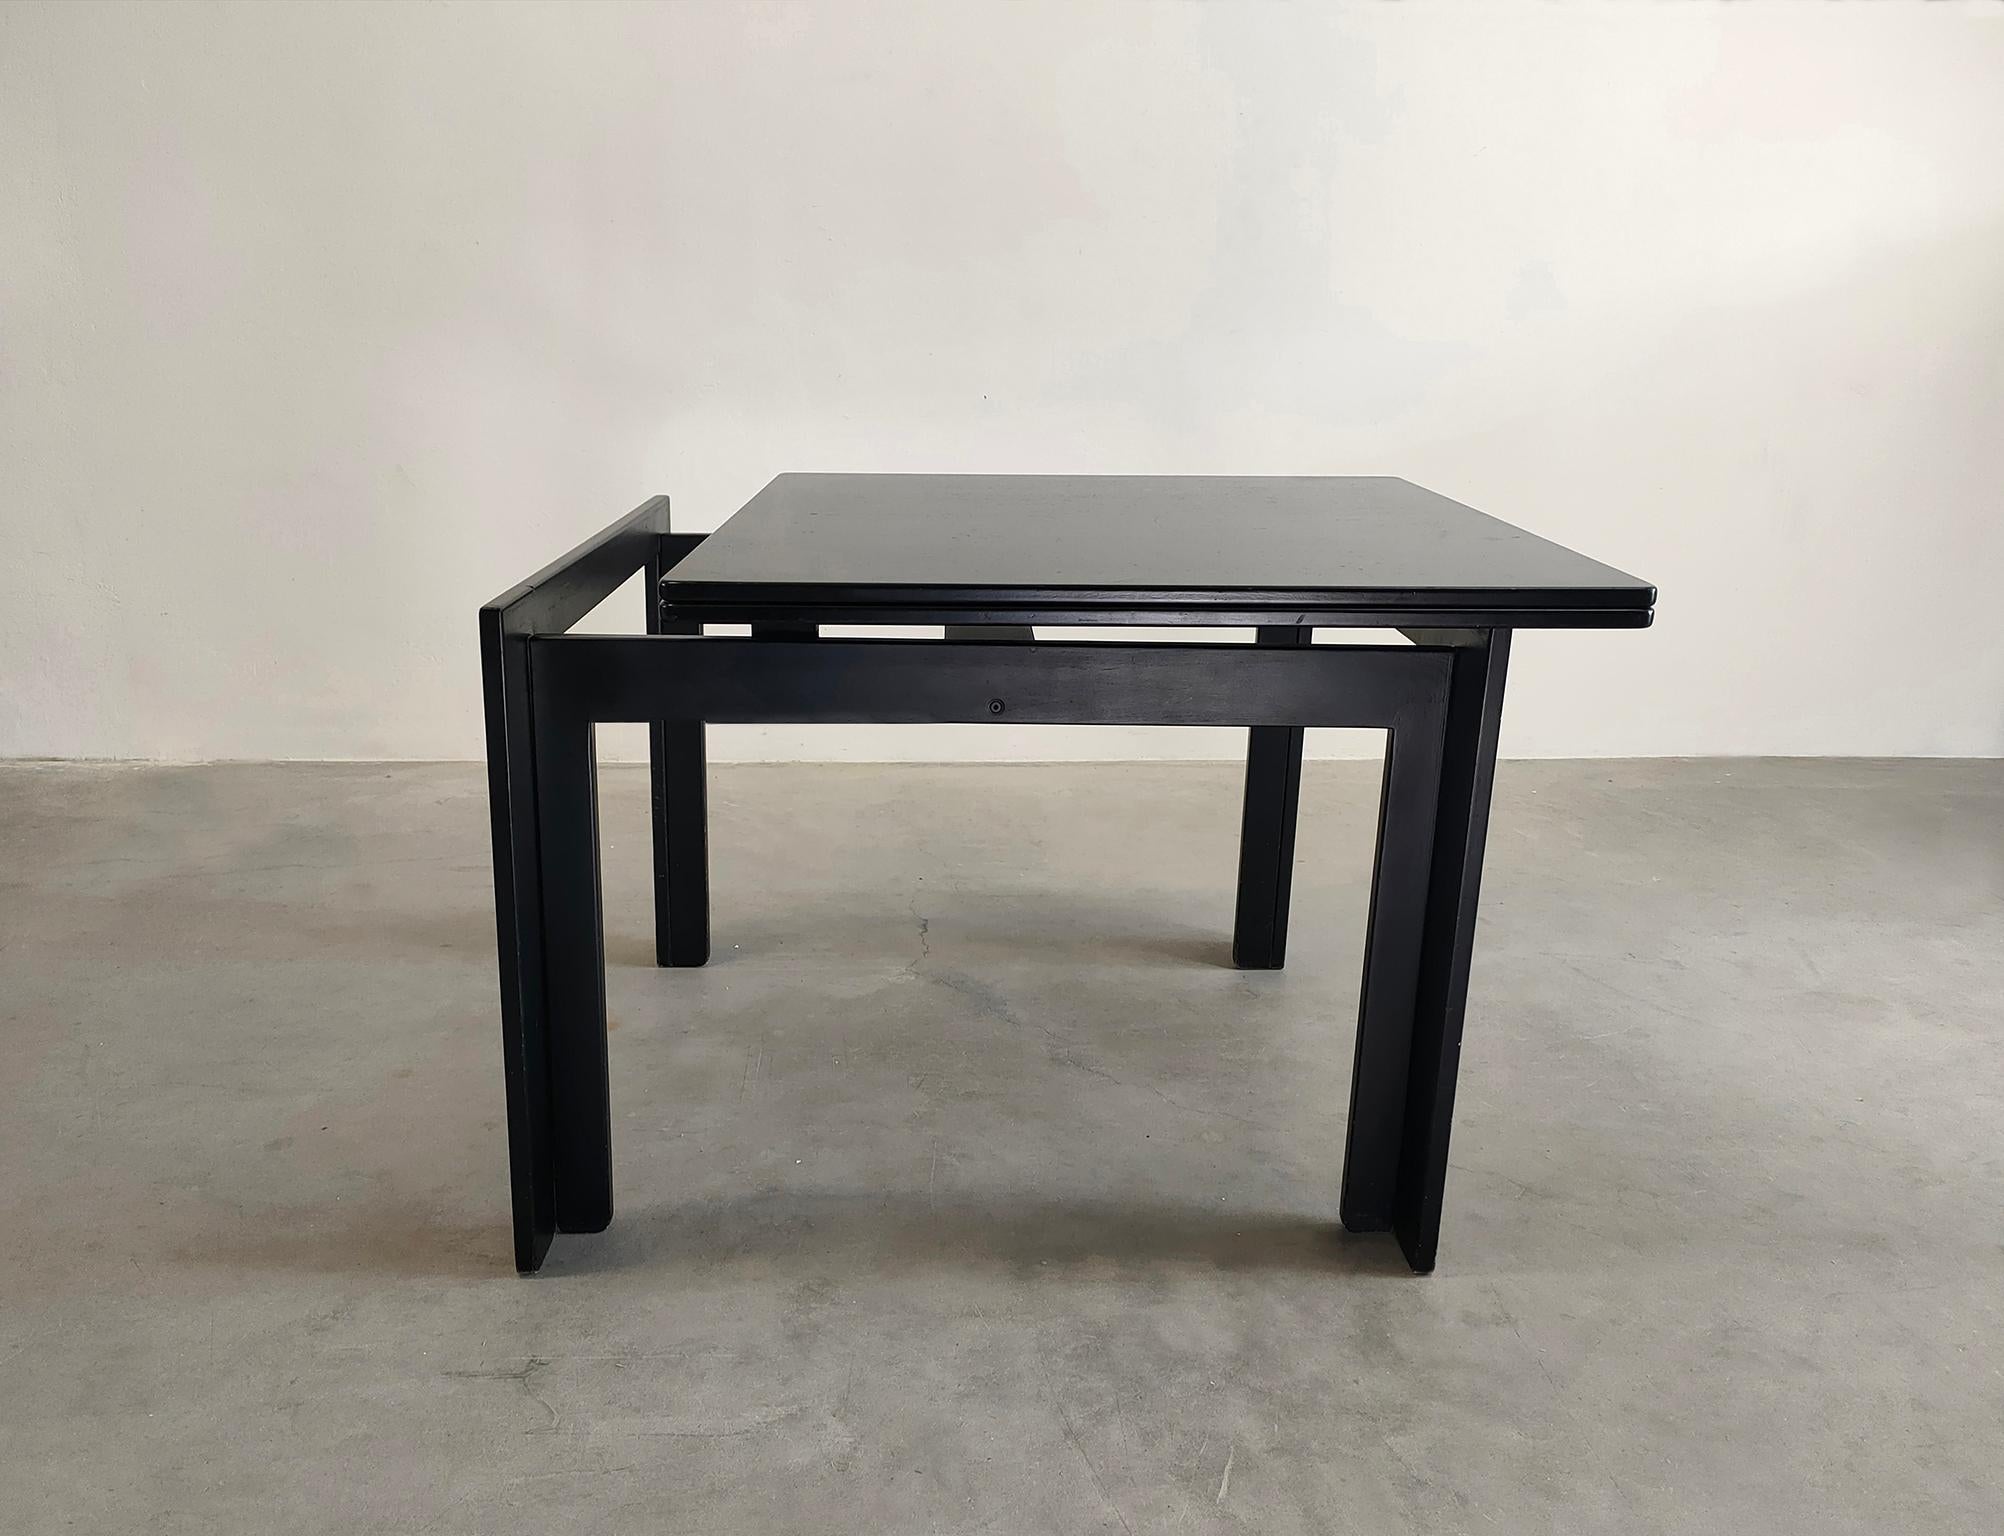 Afra & Tobia Scarpa 778 Extensible Table in Black Ashwood by Cassina 1960s In Good Condition For Sale In Montecatini Terme, IT